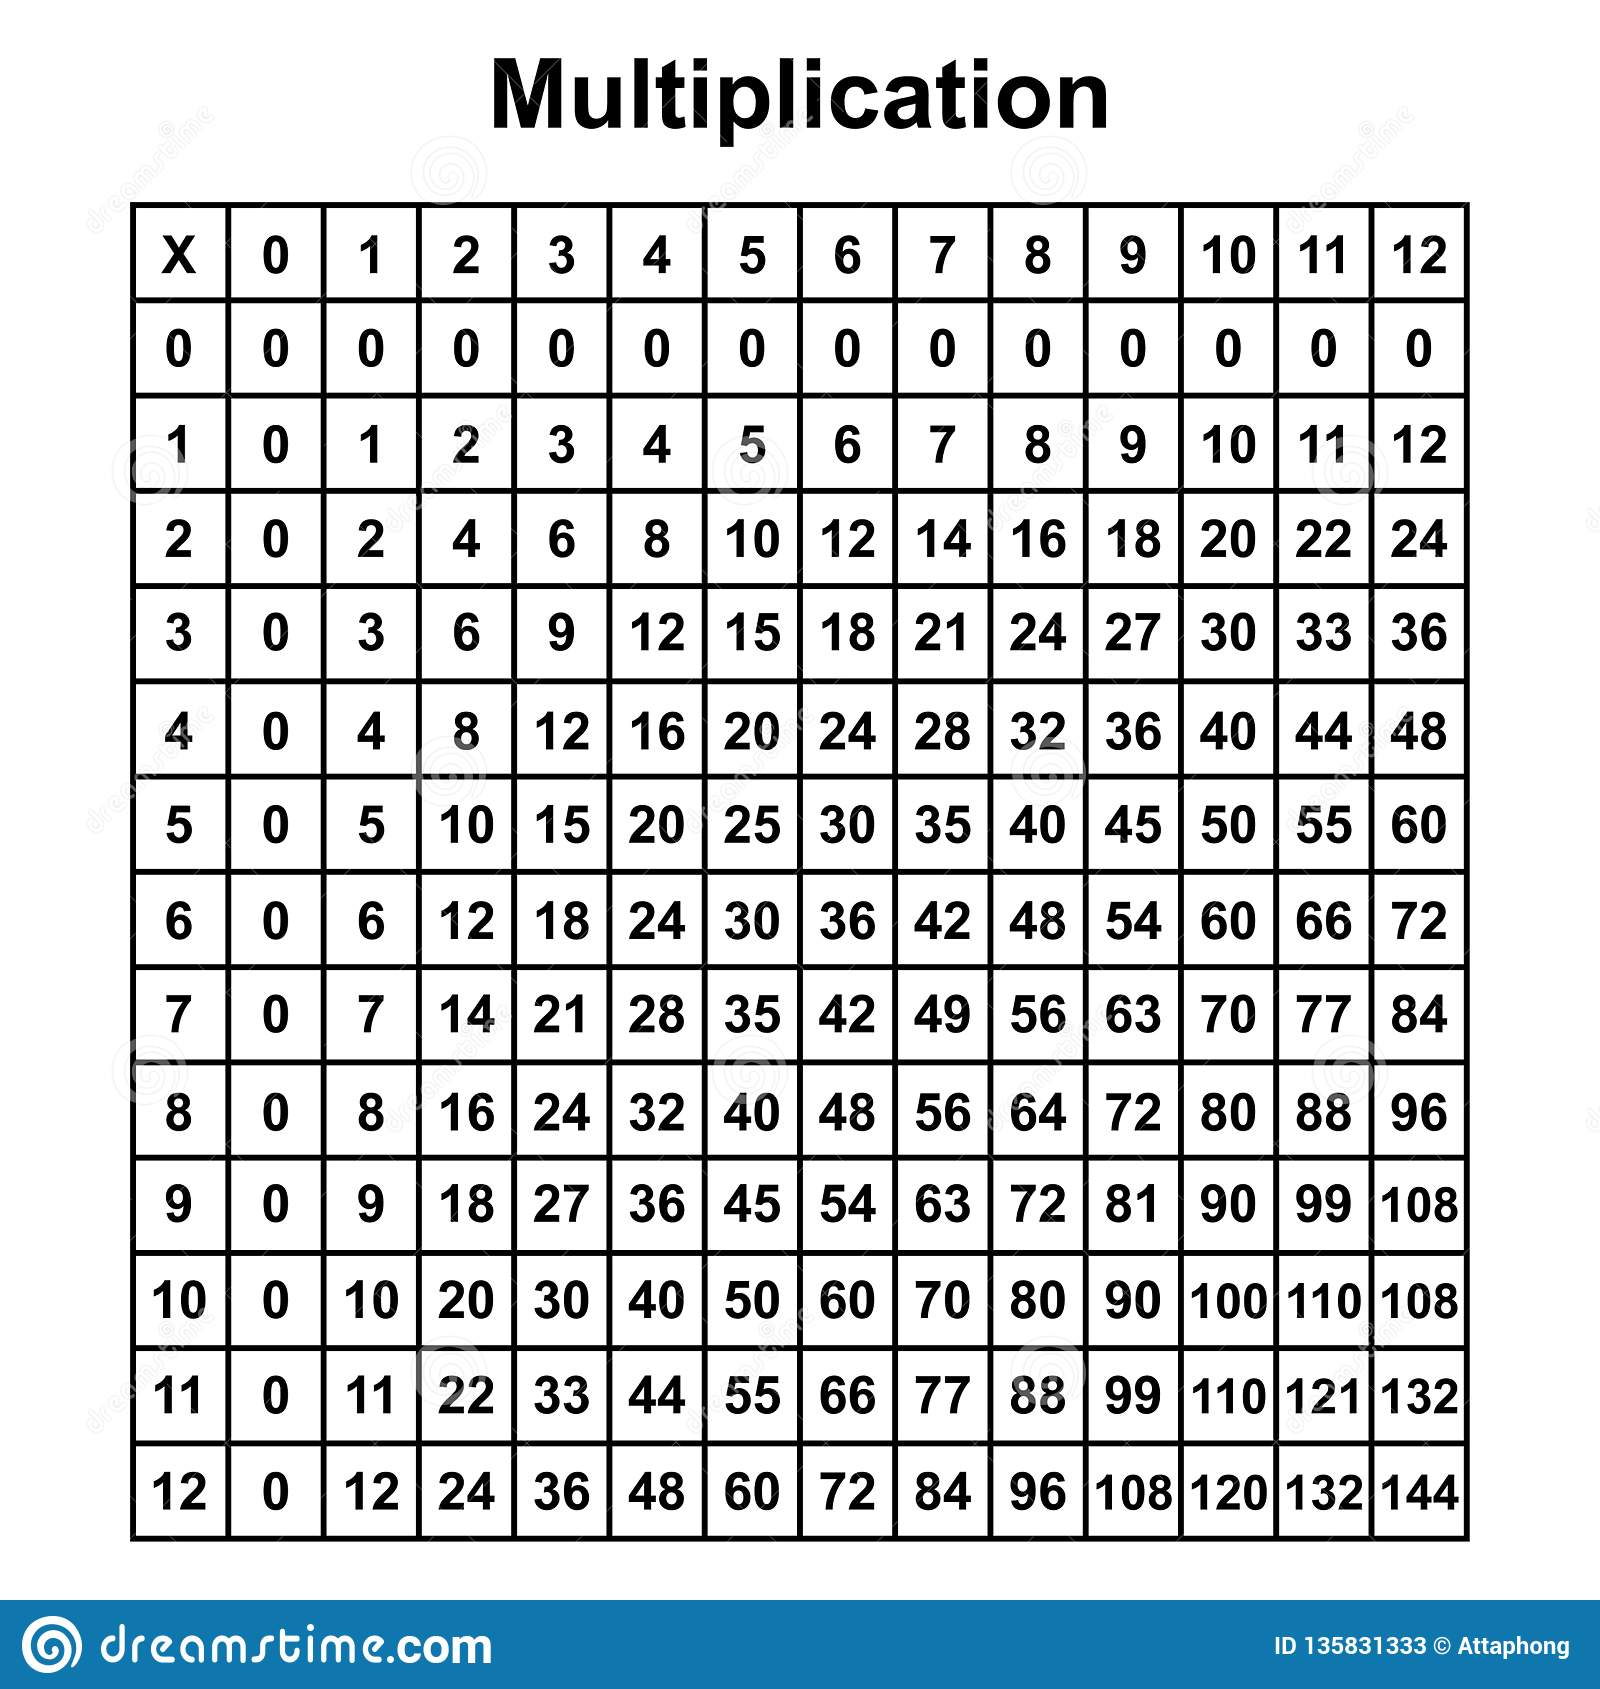 Multiplication Table Chart Or Multiplication Table Printable inside Printable Multiplication